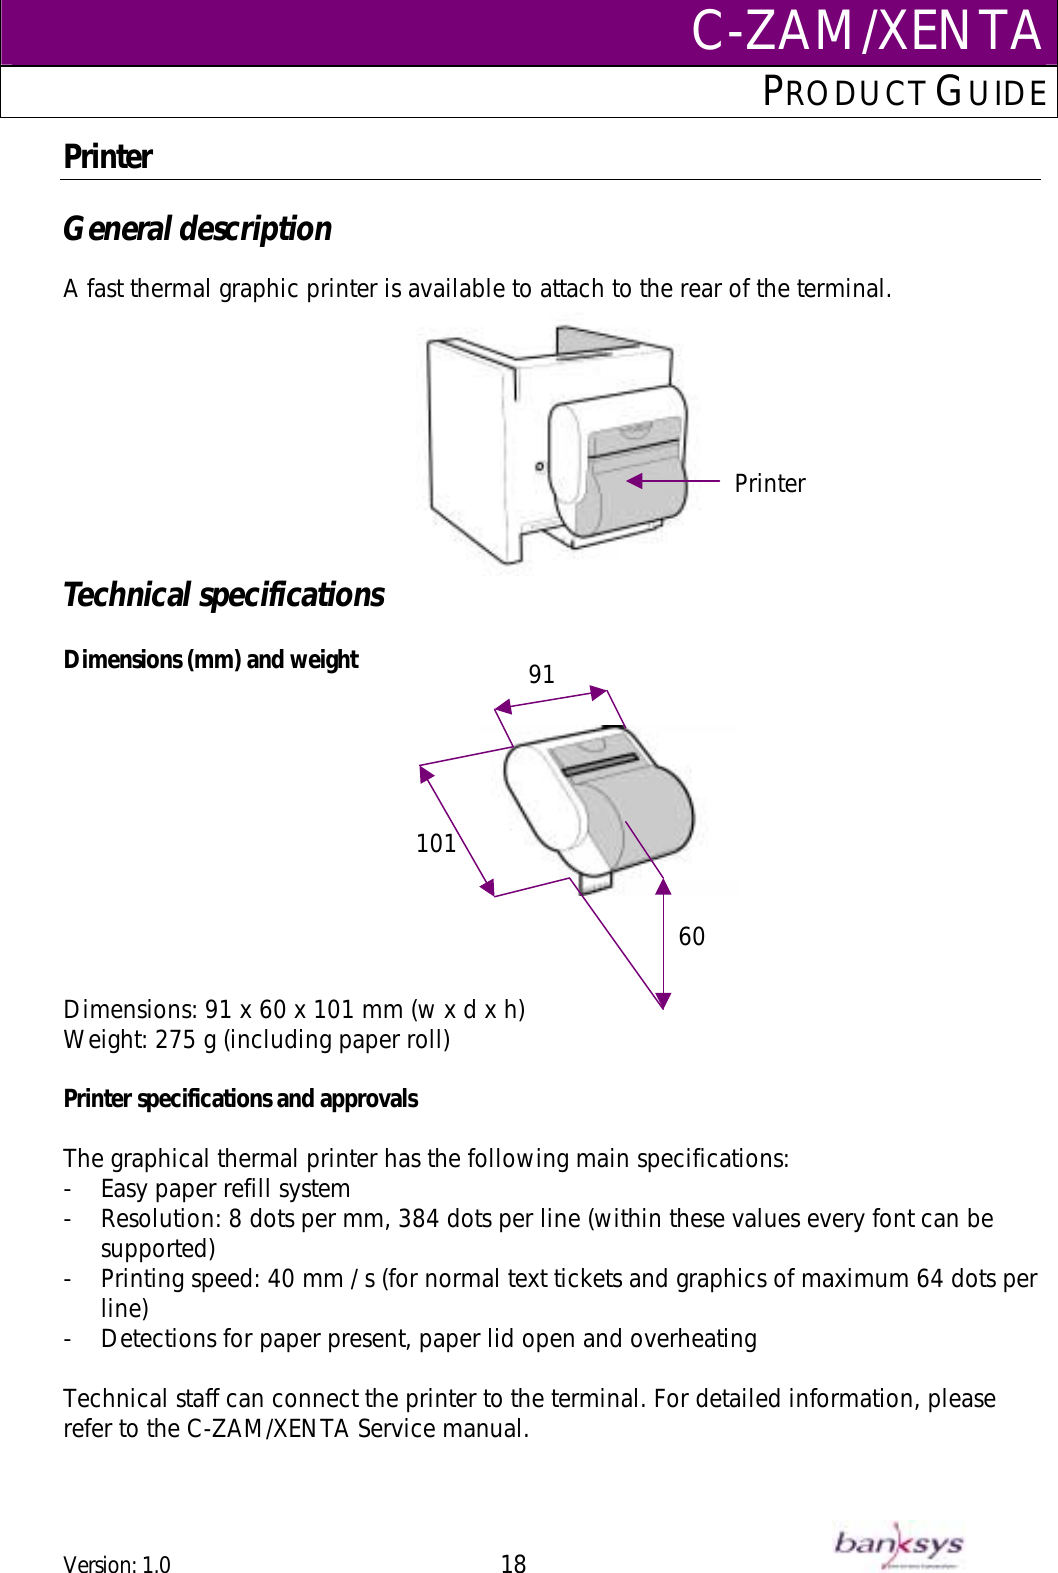 C-ZAM/XENTAPRODUCT GUIDE  Printer  General description  A fast thermal graphic printer is available to attach to the rear of the terminal. Printer Technical specifications  Dimensions (mm) and weight     Dimensions: 91 x 60 x 101 mm (w x d x h) 6091101Weight: 275 g (including paper roll)  Printer specifications and approvals  The graphical thermal printer has the following main specifications: -  Easy paper refill system  -  Resolution: 8 dots per mm, 384 dots per line (within these values every font can be supported) -  Printing speed: 40 mm / s (for normal text tickets and graphics of maximum 64 dots per line) -  Detections for paper present, paper lid open and overheating   Technical staff can connect the printer to the terminal. For detailed information, please refer to the C-ZAM/XENTA Service manual.  Version: 1.0 18      